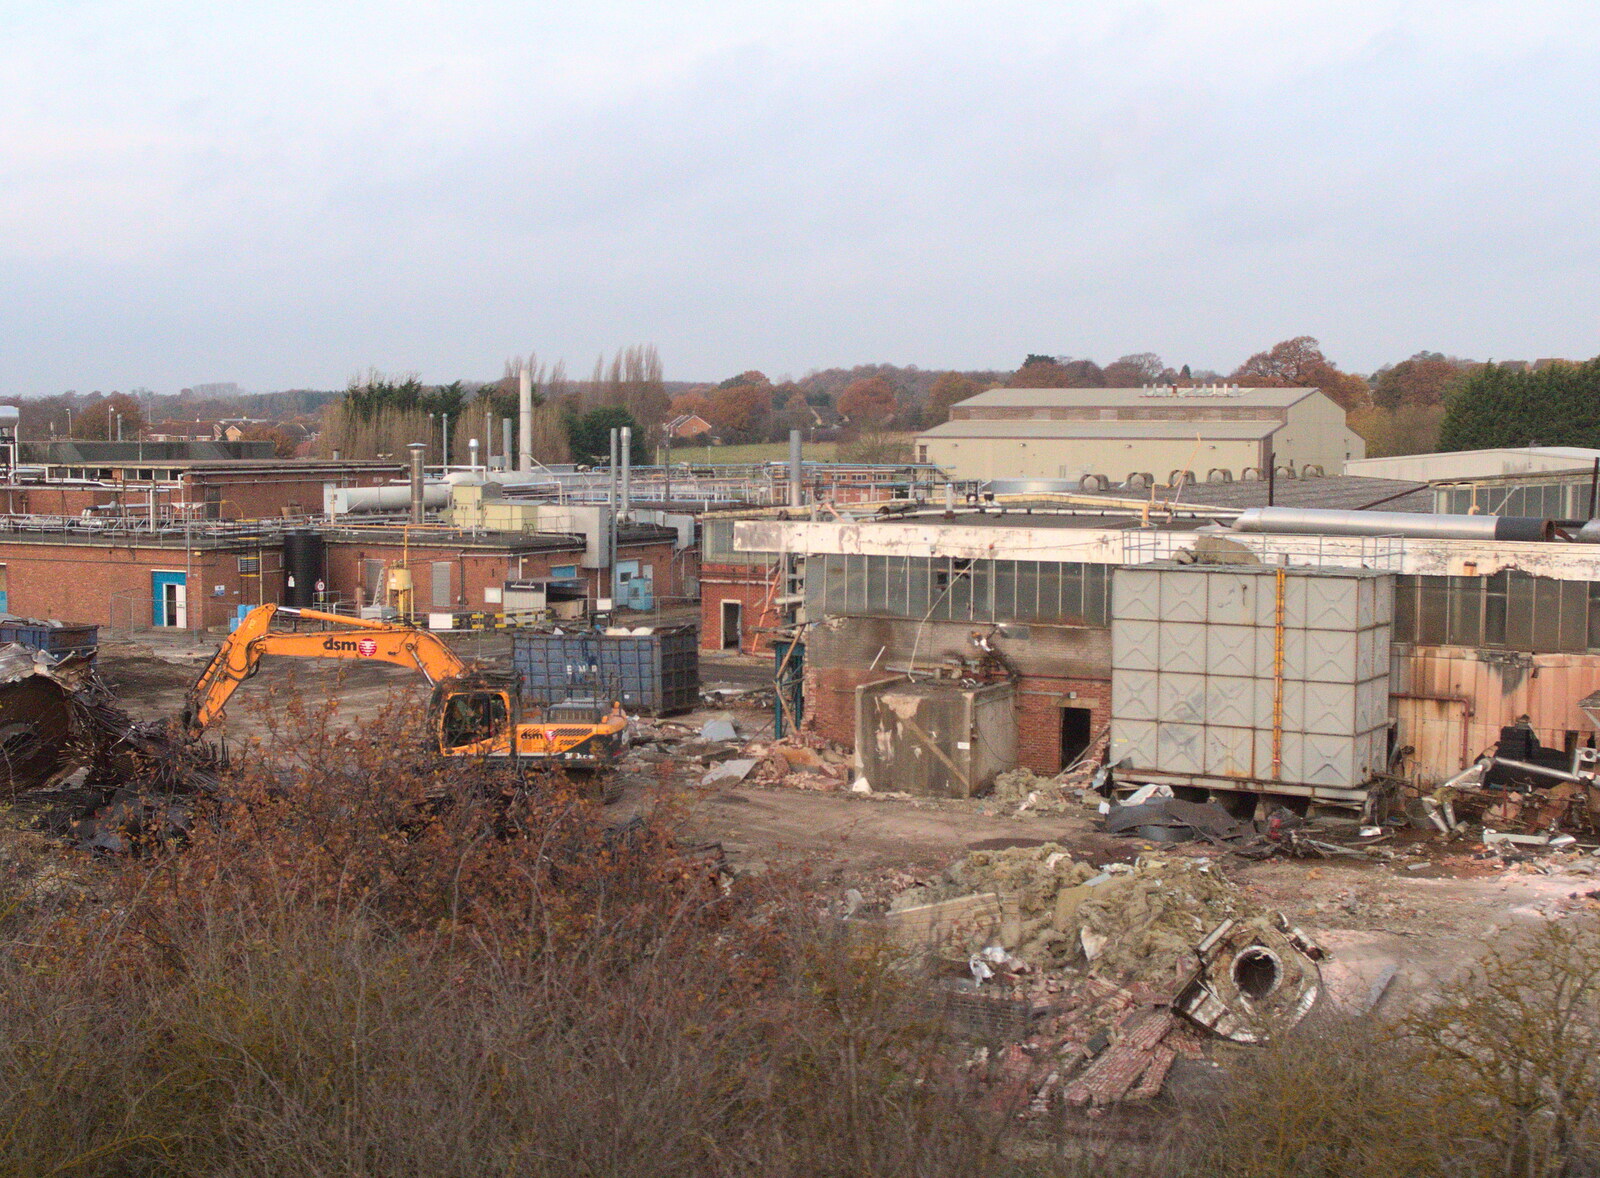 The old Wardle-Storey site is chewed up from A Late November Miscellany, Diss, Brantham and London - 30th November 2017